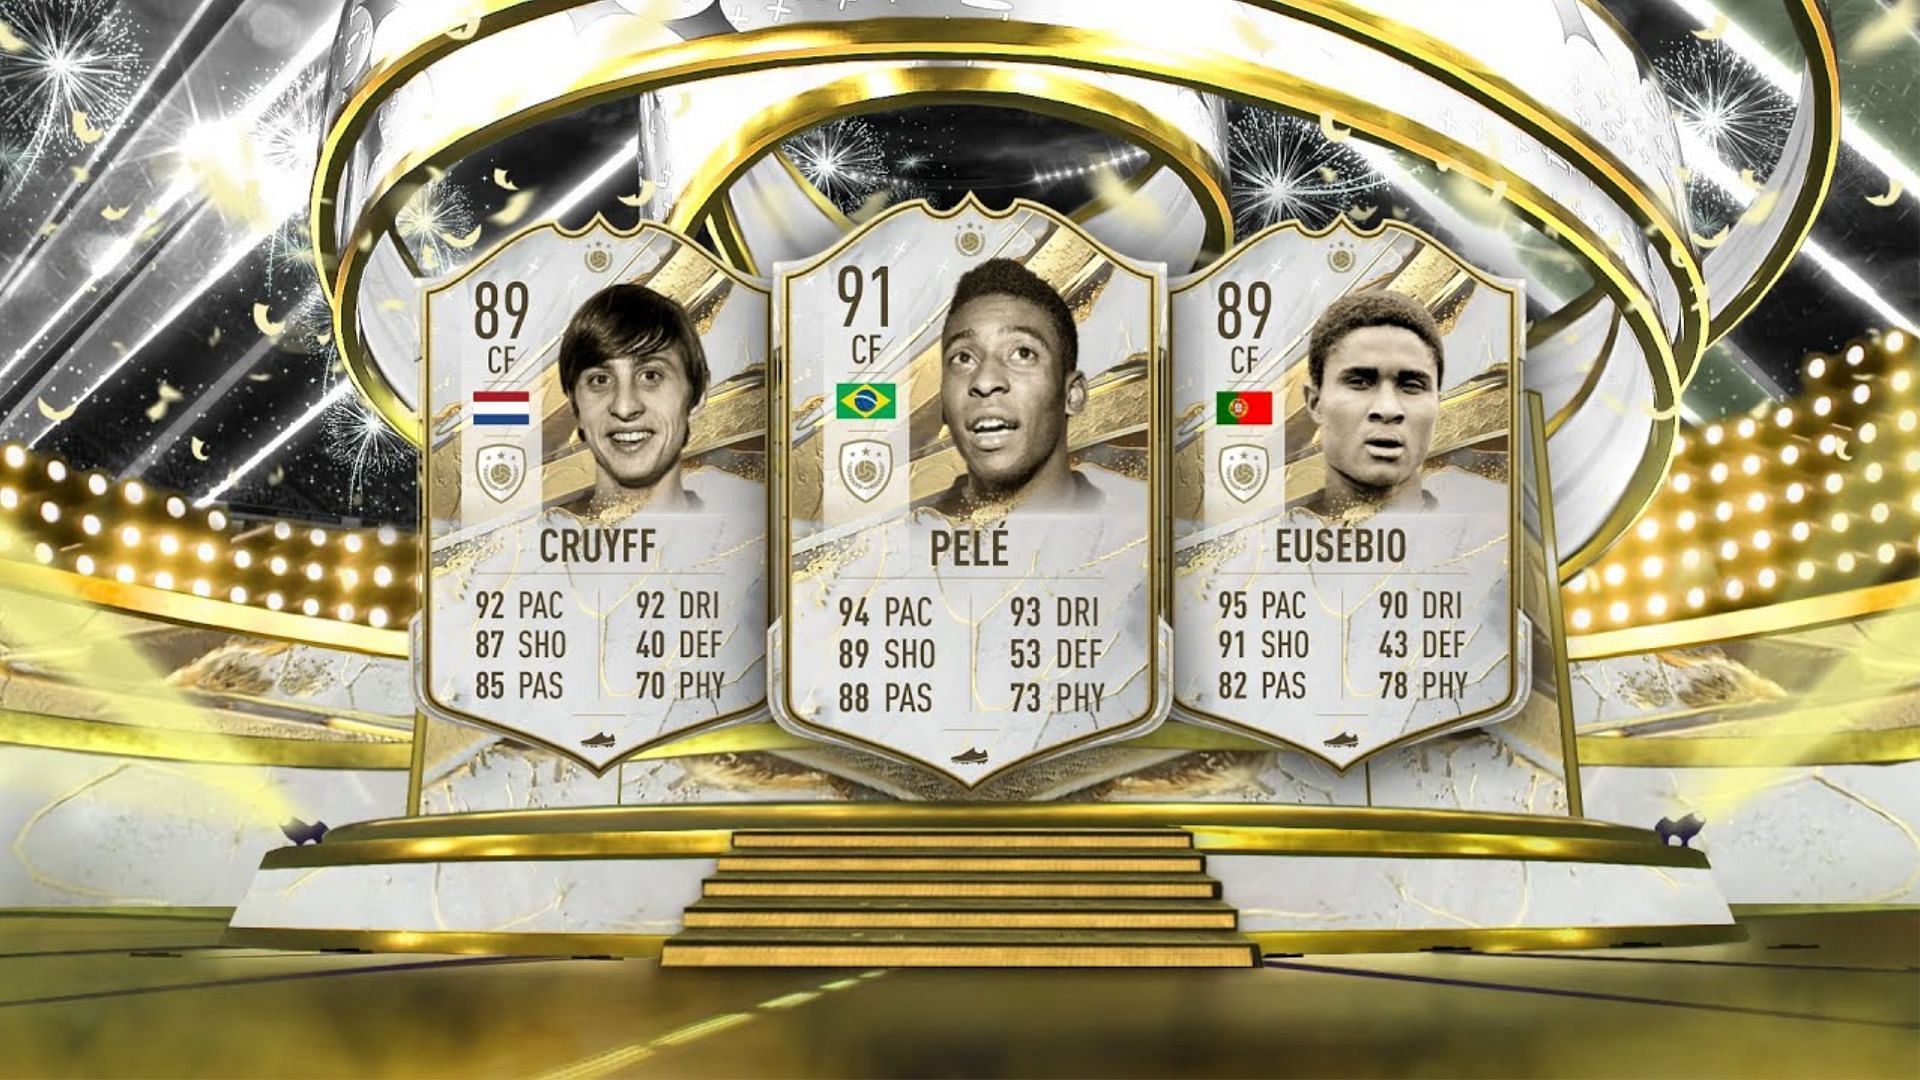 A new Icon SBC has been released in FIFA 23 (Image via YouTube/HomelesPenguin)